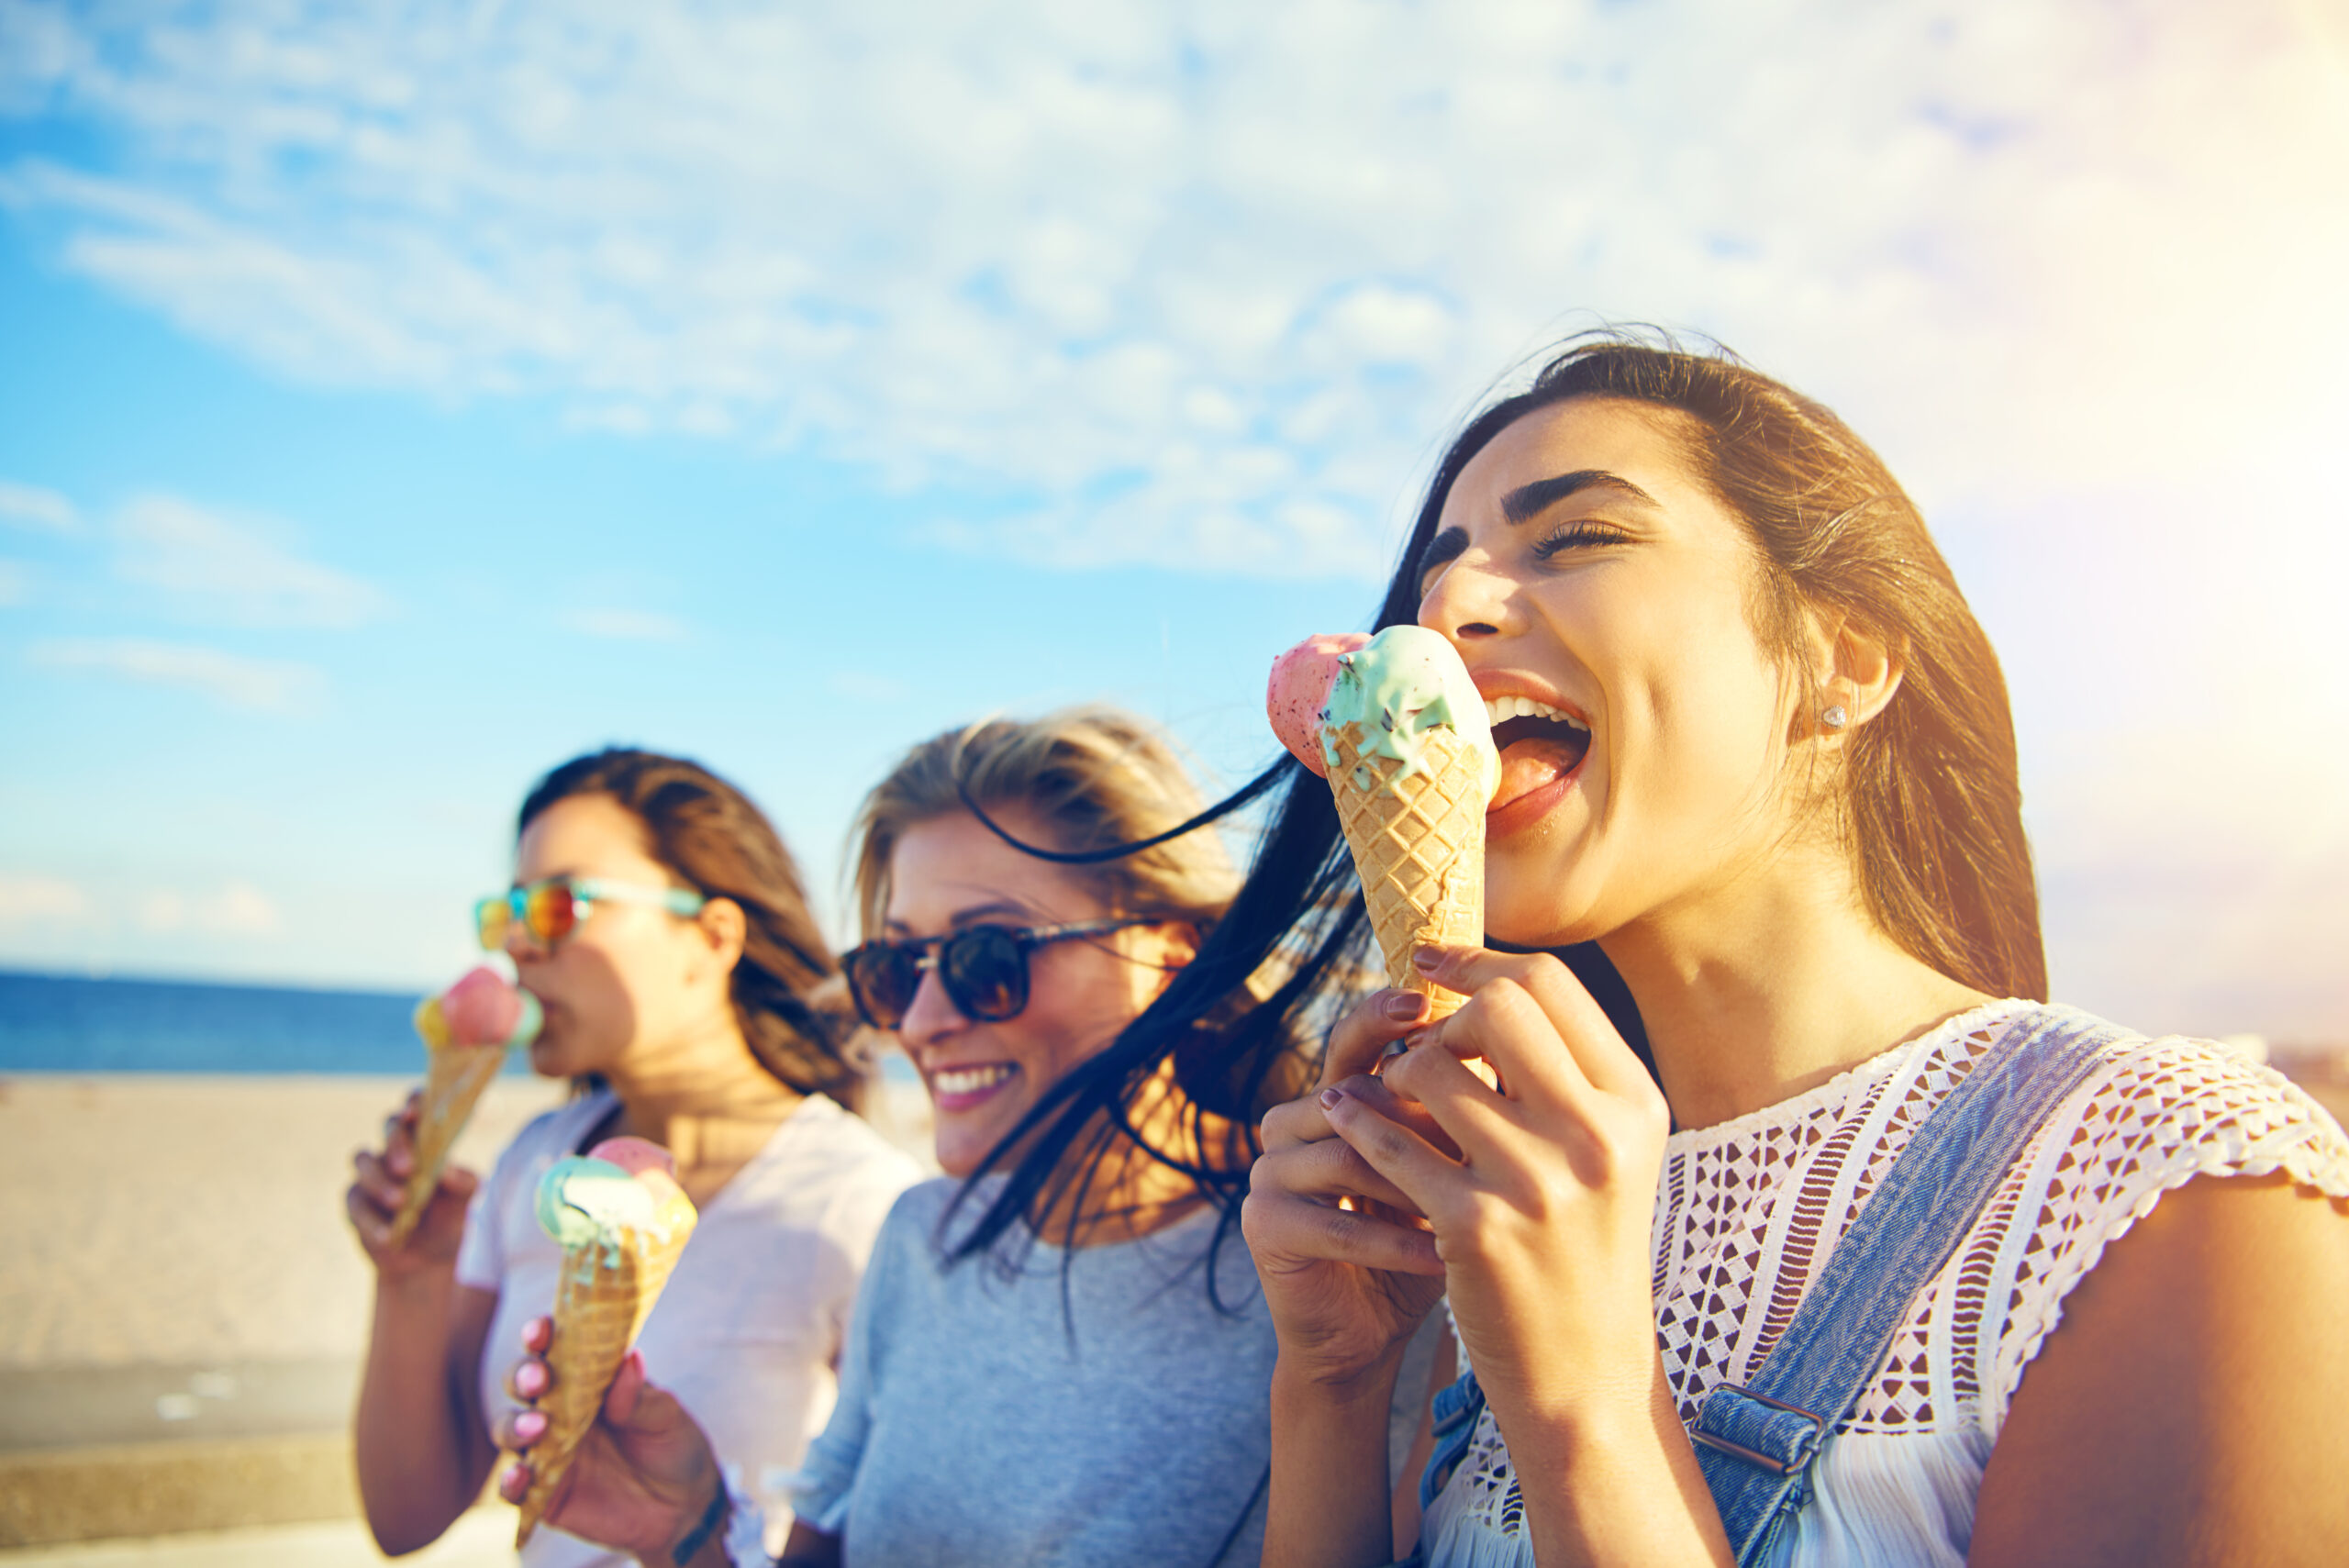 Three young woman eating ice cream cones at the seaside as they stroll along a waterfront promenade on a hot summer day during their vacation